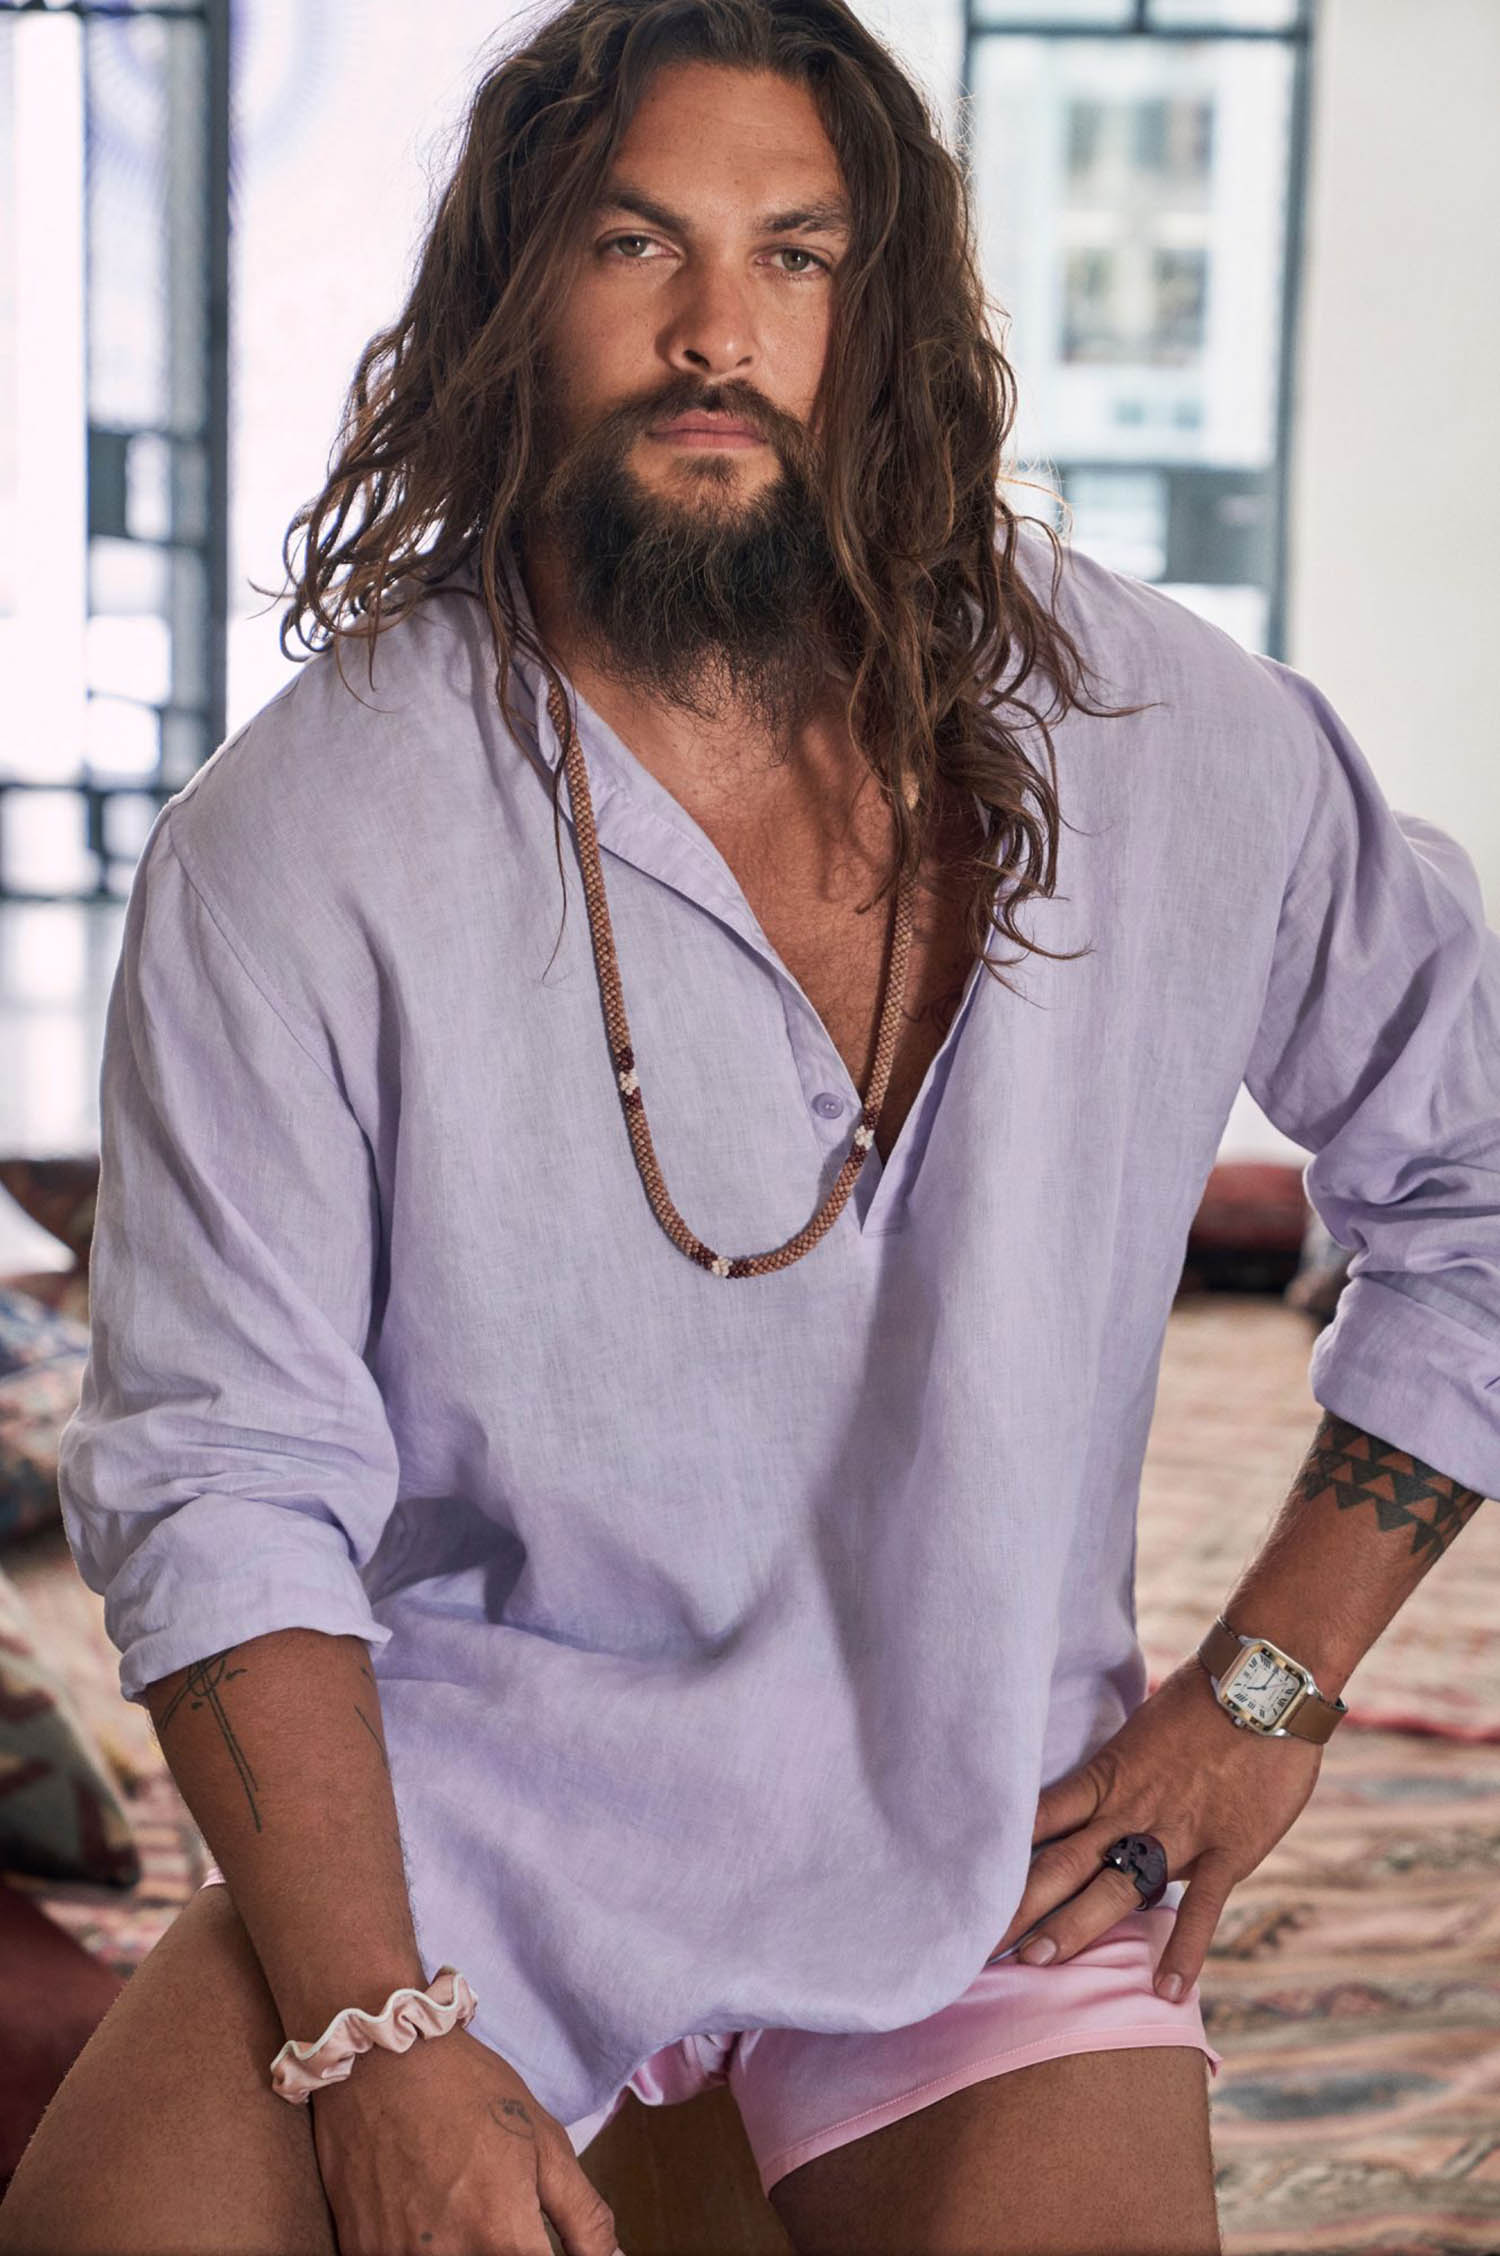 Jason Momoa by Carter Smith for InStyle US December 2020